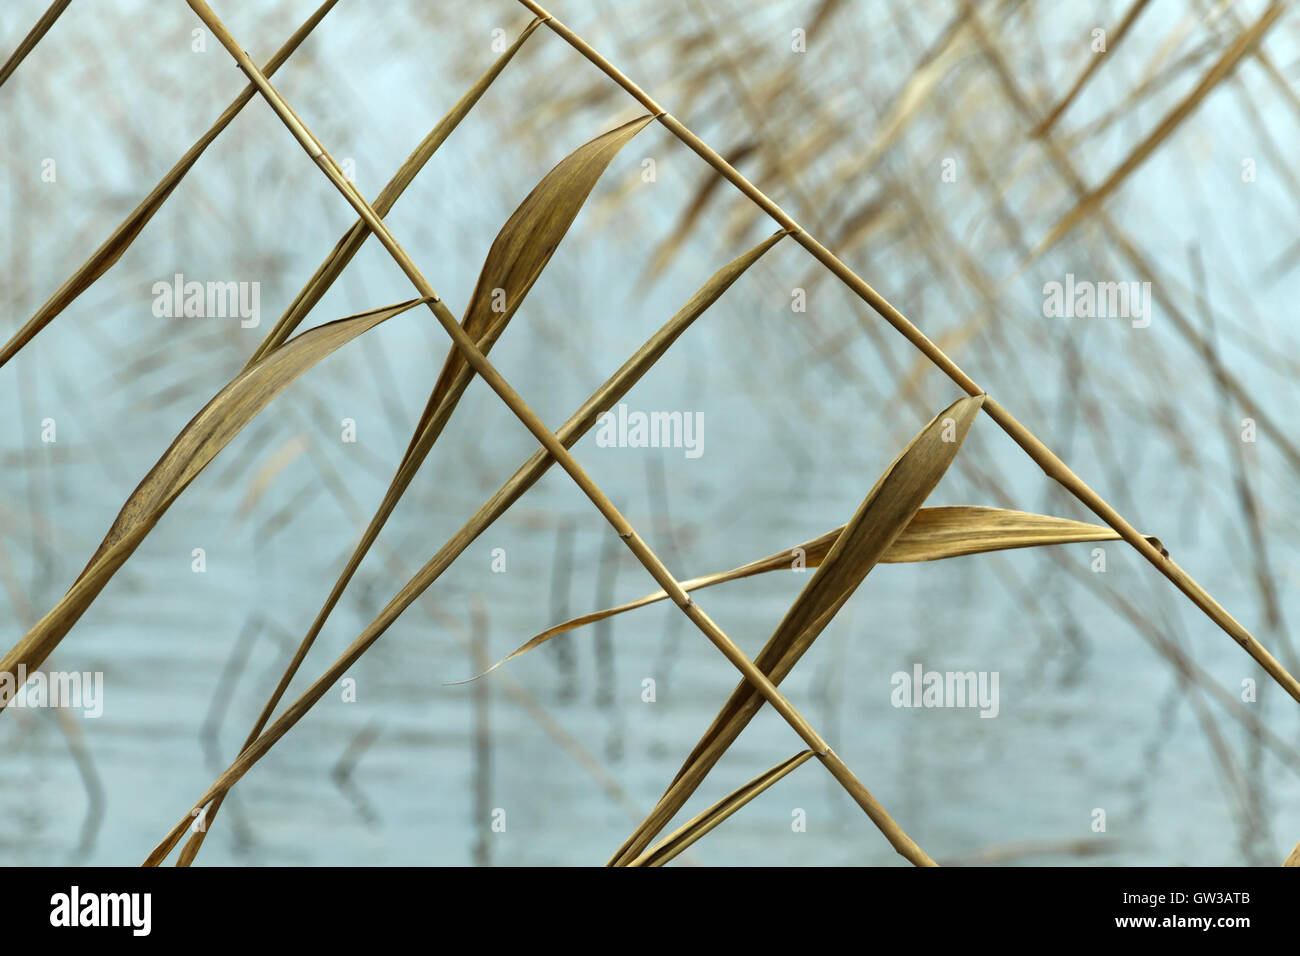 Abstract seasonal autumn background: dry plant / reed / reeds bush closeup forming a geometric pattern Stock Photo